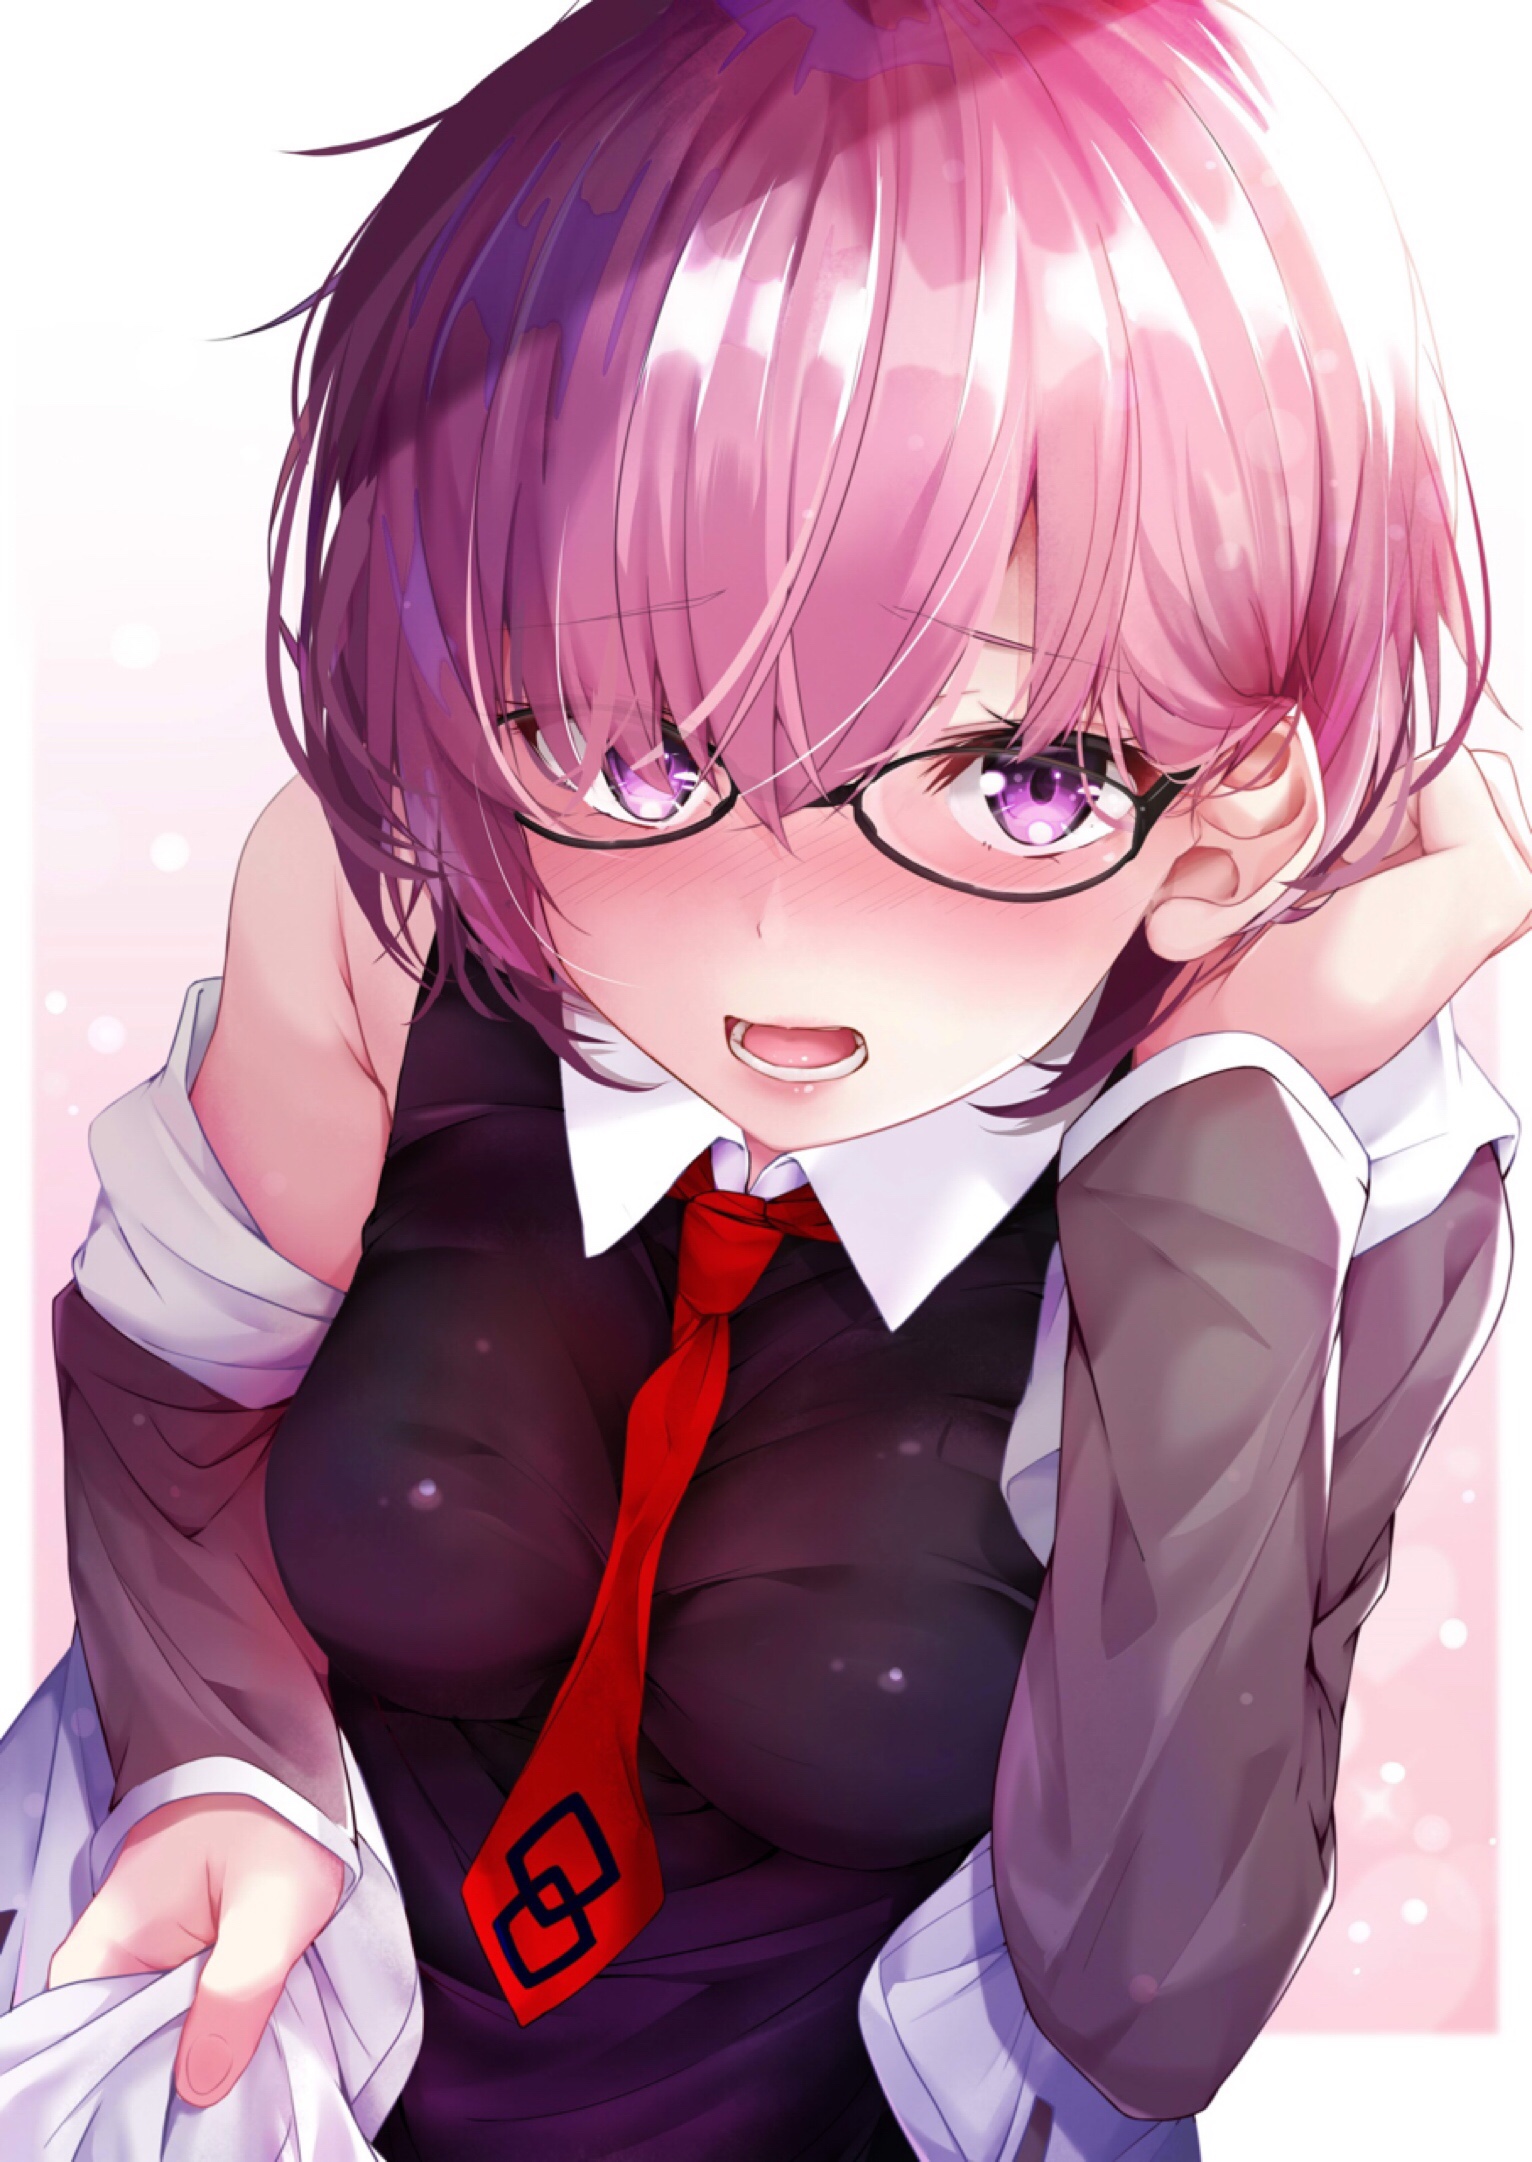 Anime 1532x2162 Fate series Fate/Grand Order anime girls big boobs blushing embarrassed high angle short hair purple hair Mash Kyrielight looking at viewer women with glasses red tie touching hair 2D purple eyes portrait display fan art open mouth pink hair glasses Rouka